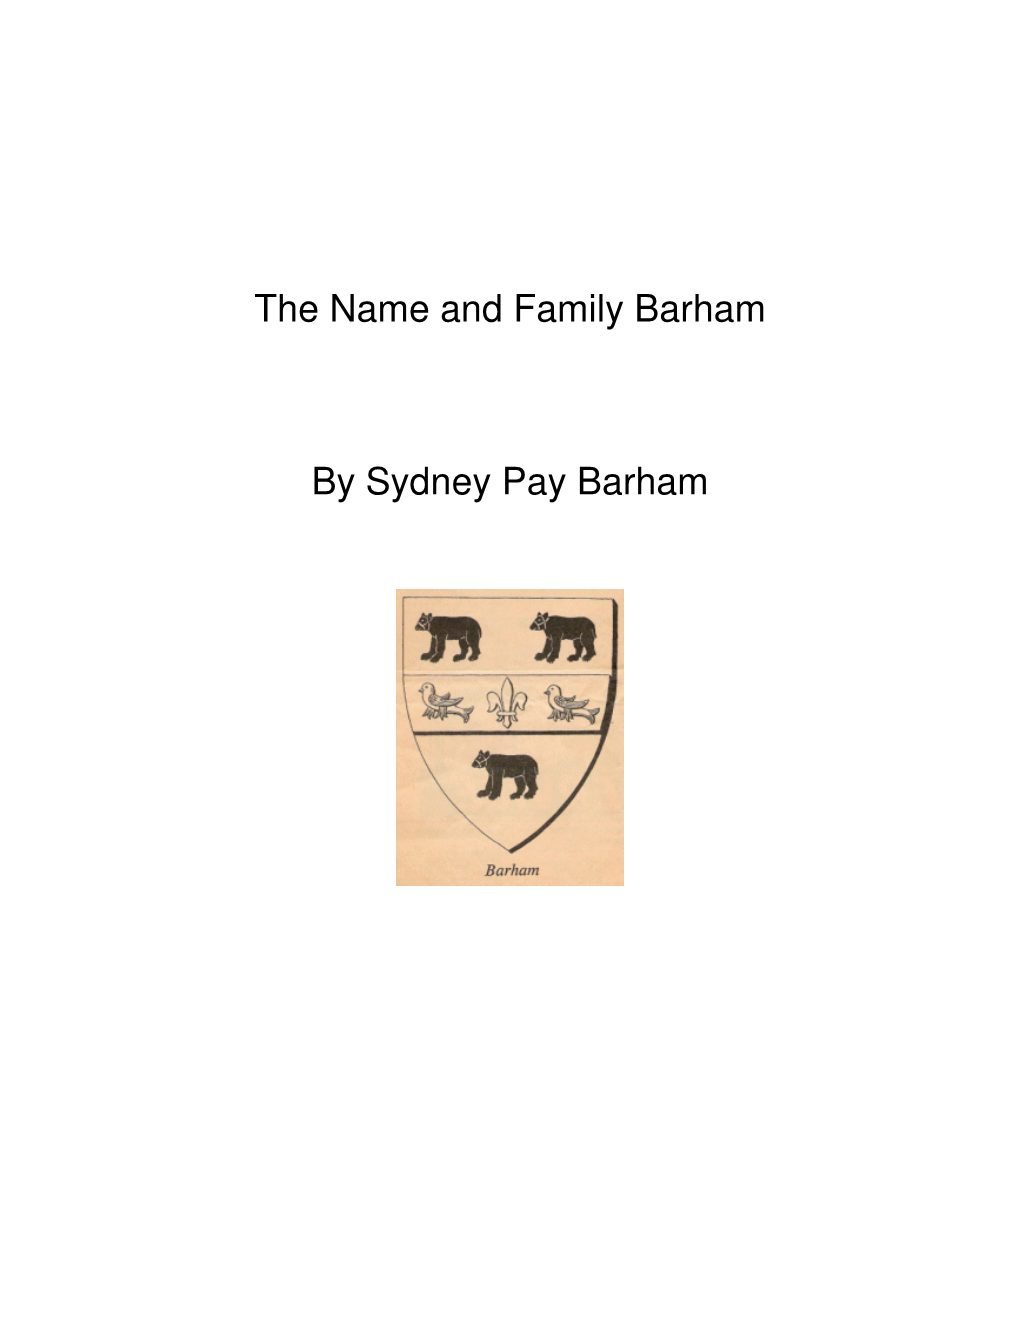 The Name and Family Barham by Sydney Pay Barham